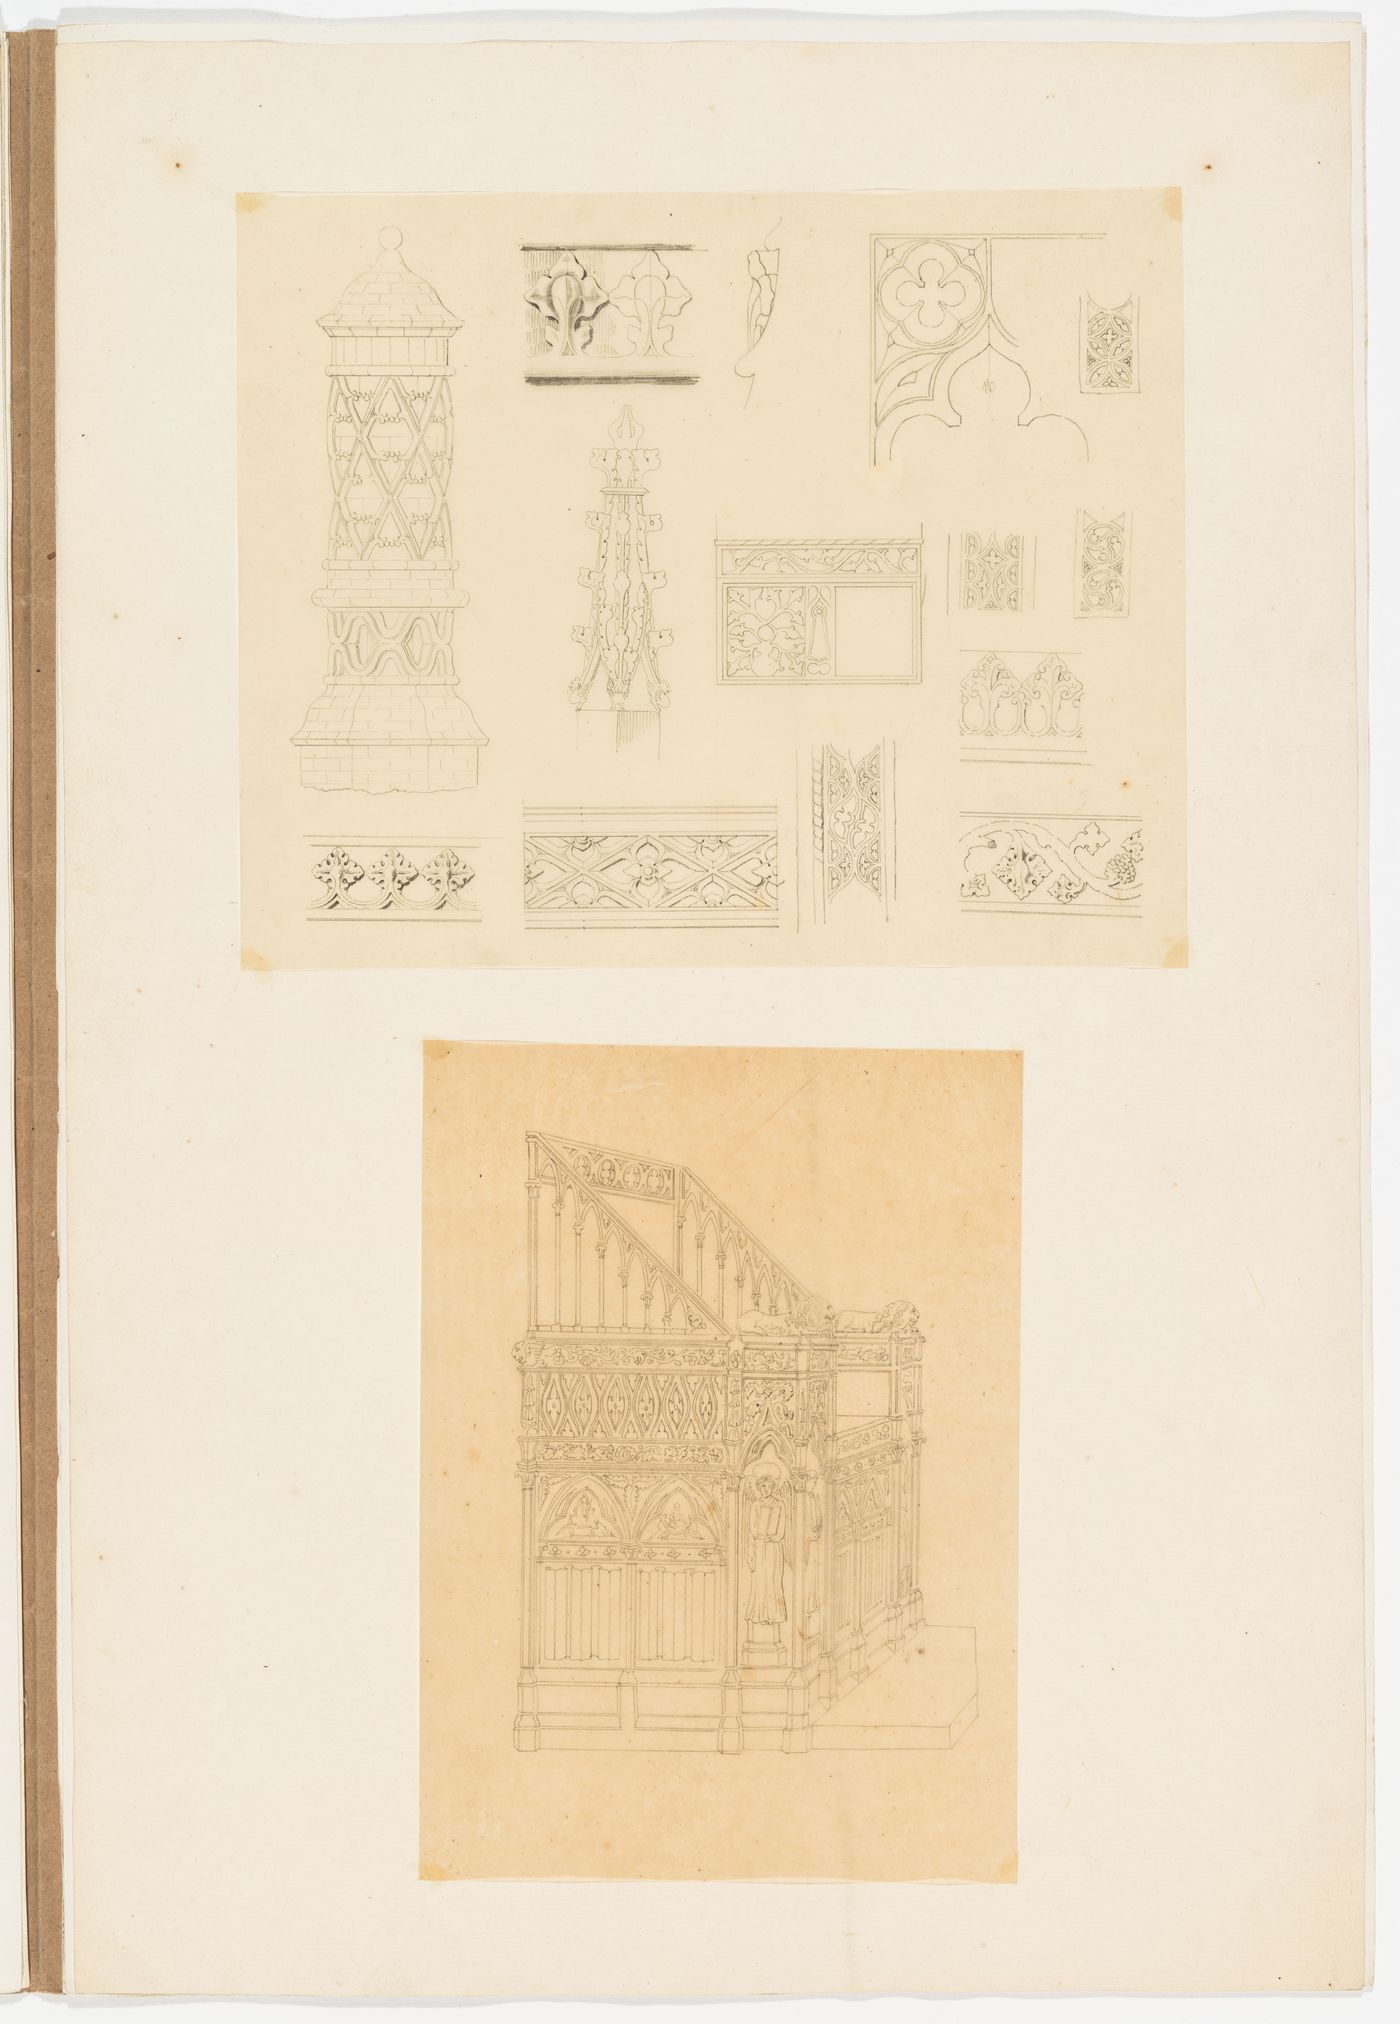 Drawings of Gothic ornament and architectural elements including a pinnacle, a trefoil with spandrels, and running foliated ornament, probably for moldings; Drawing of an ornate carved bishop's throne